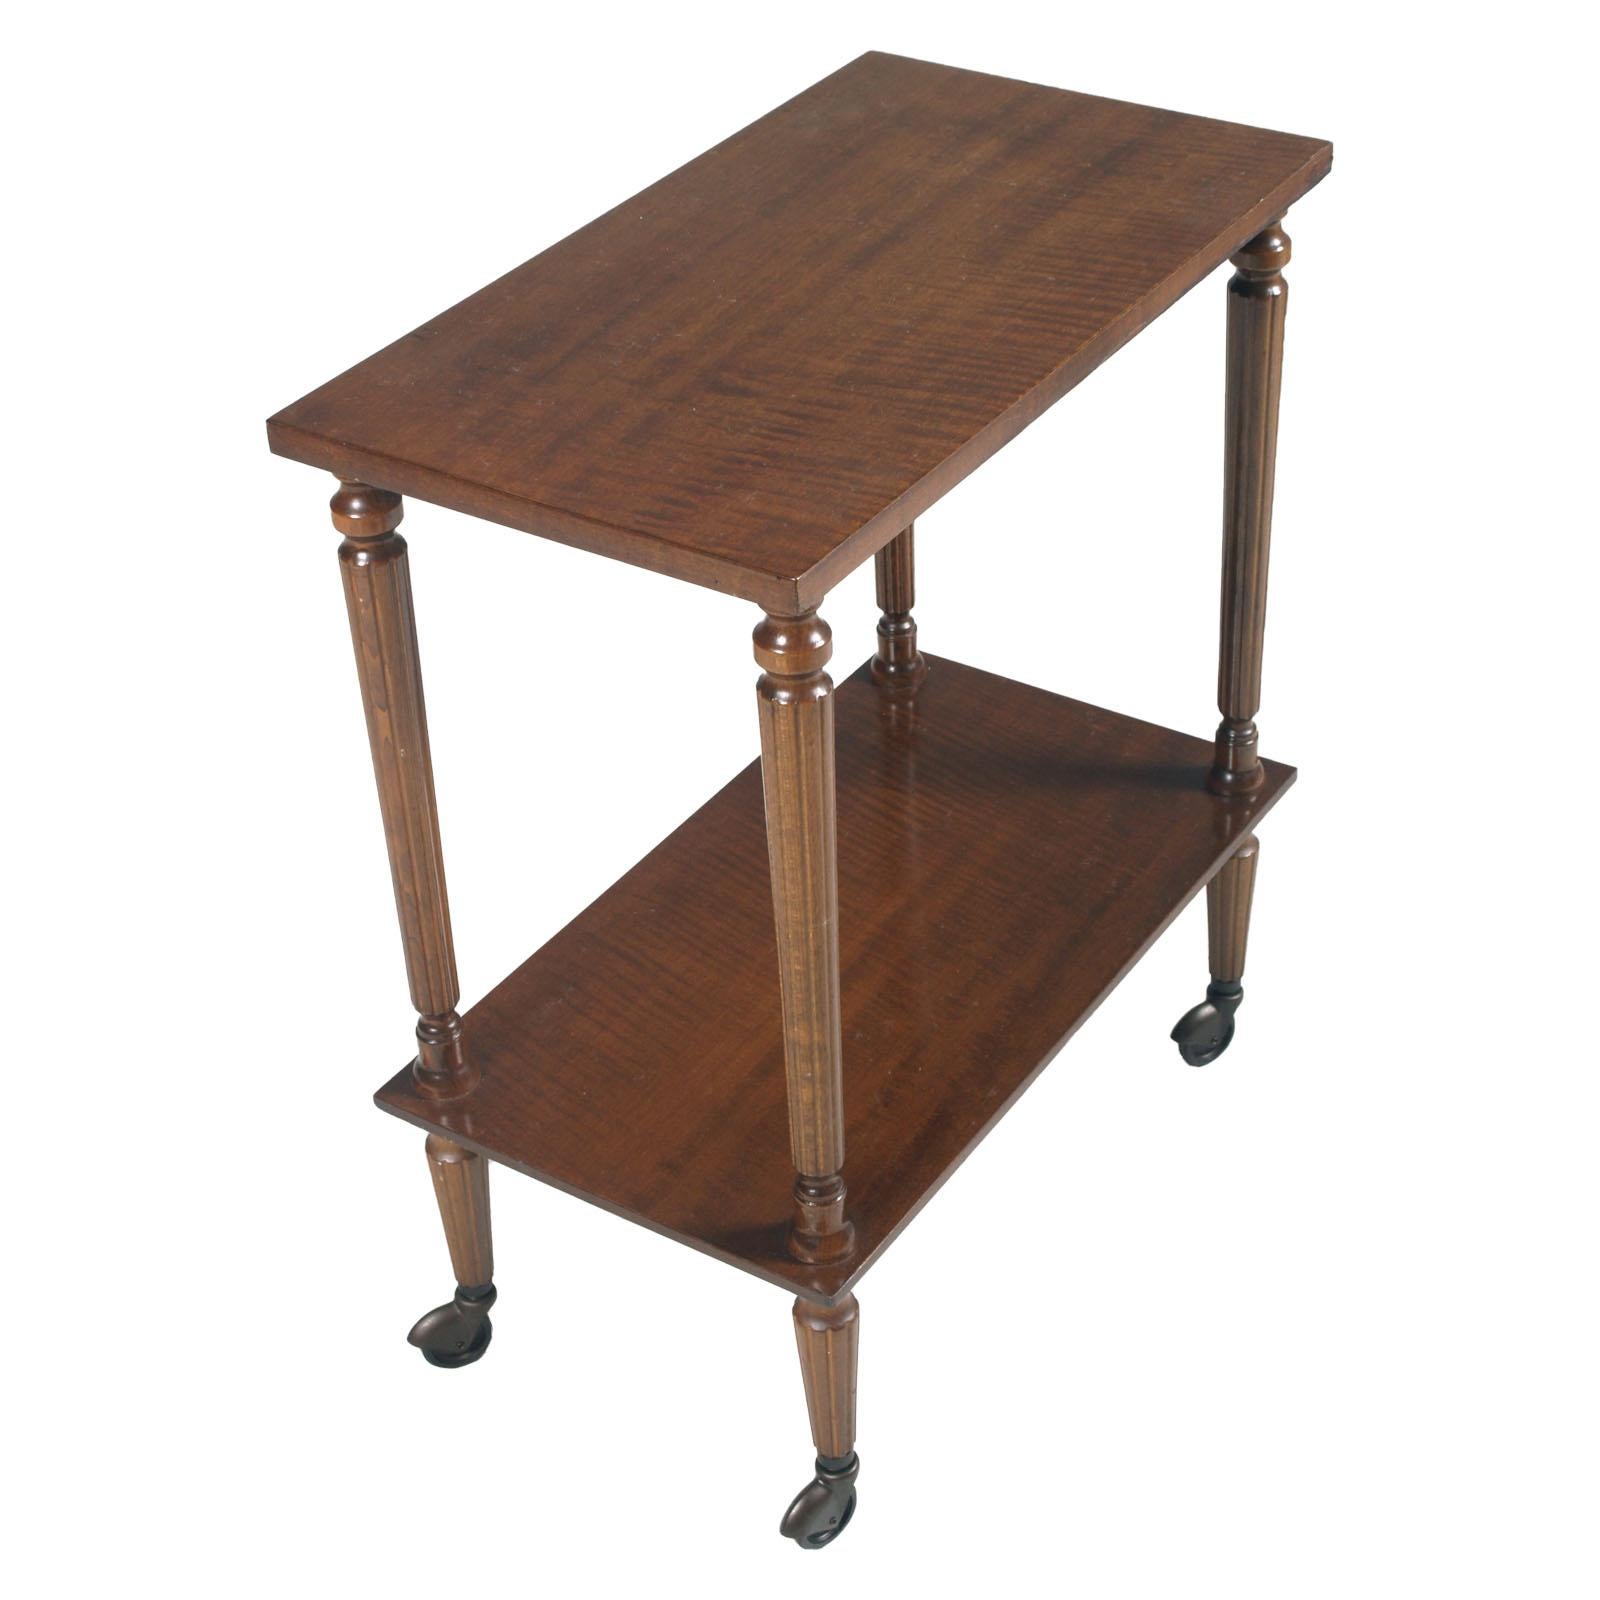 Italian 1940s bar cart, service little table, directory style, with legs in carved massive walnut and tops in veneer walnut, restored and wax-polished.

Measures cm: H 71, W 60, D 34 (H shelves 46cm).